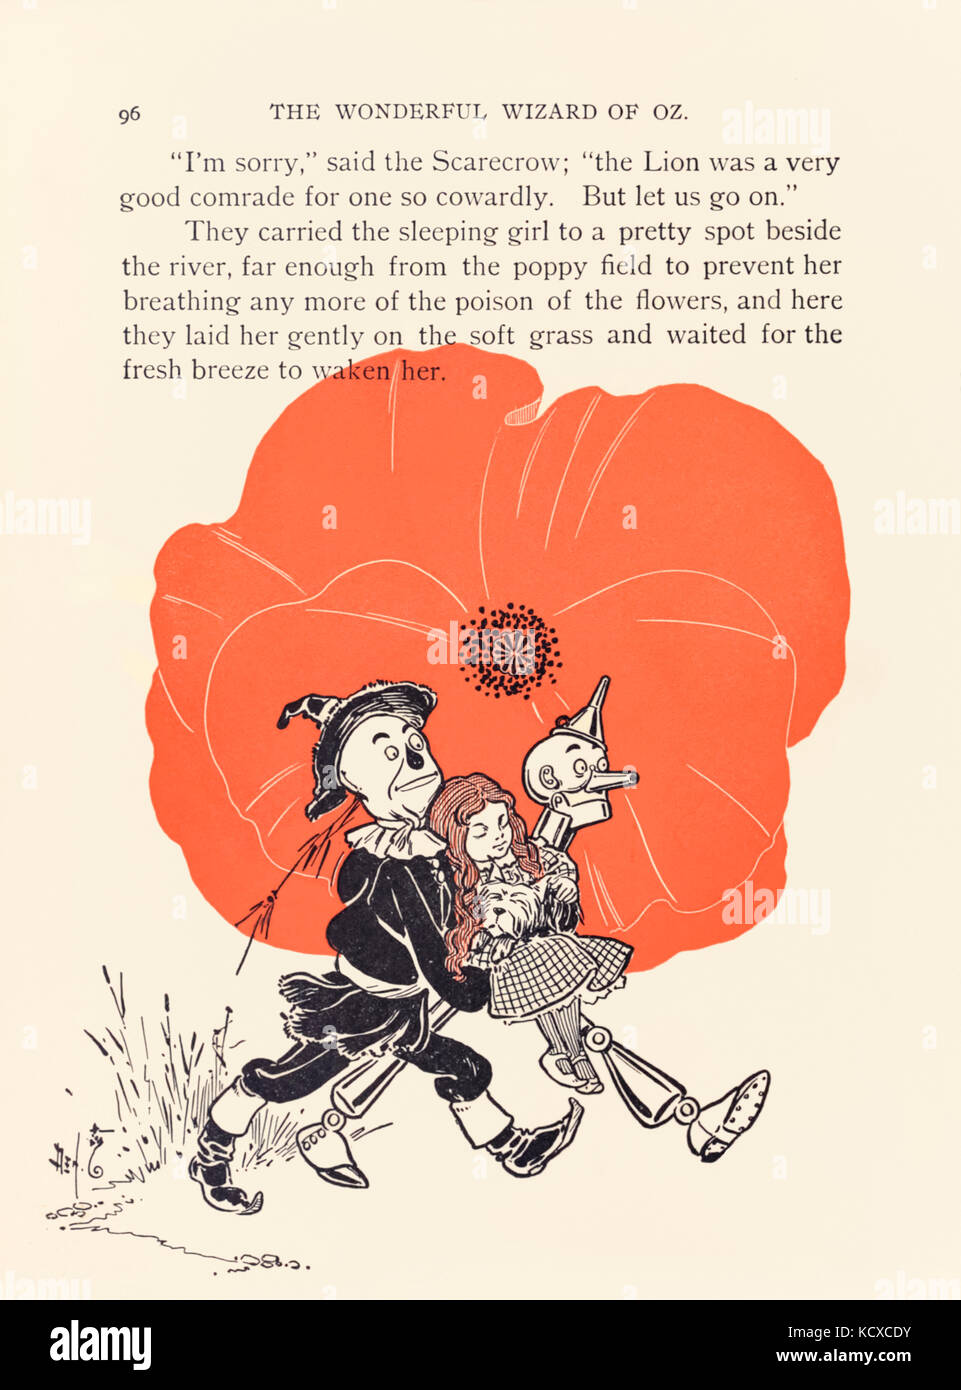 The Scarecrow and Tin Woodman rescue Dorothy from the deadly poppy field, from ‘The Wonderful Wizard of Oz’ by L. Frank Baum (1856-1919) with pictures by W. W. Denslow (1856-1915). See more information below. Stock Photo